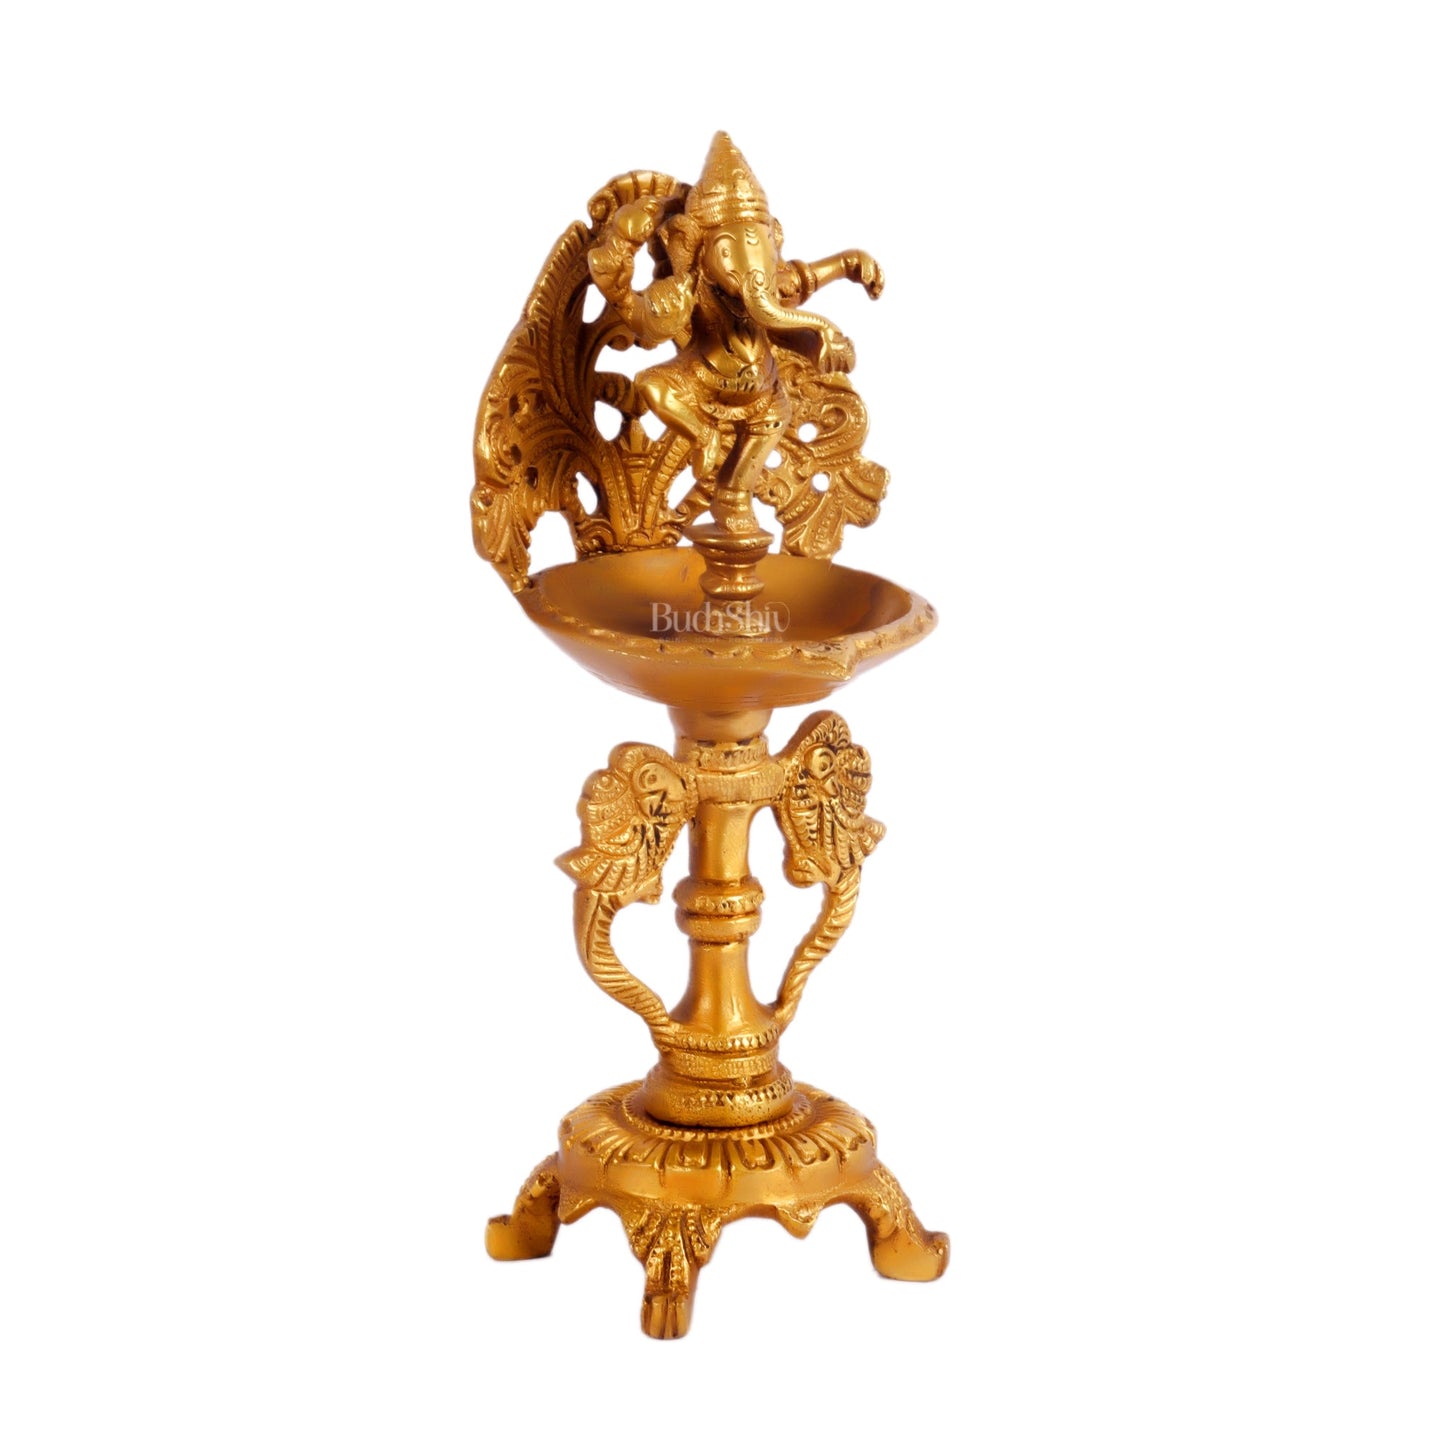 Brass engraved Dancing Ganesha diya with a stand peacock and floral design 9 inch - Budhshiv.com